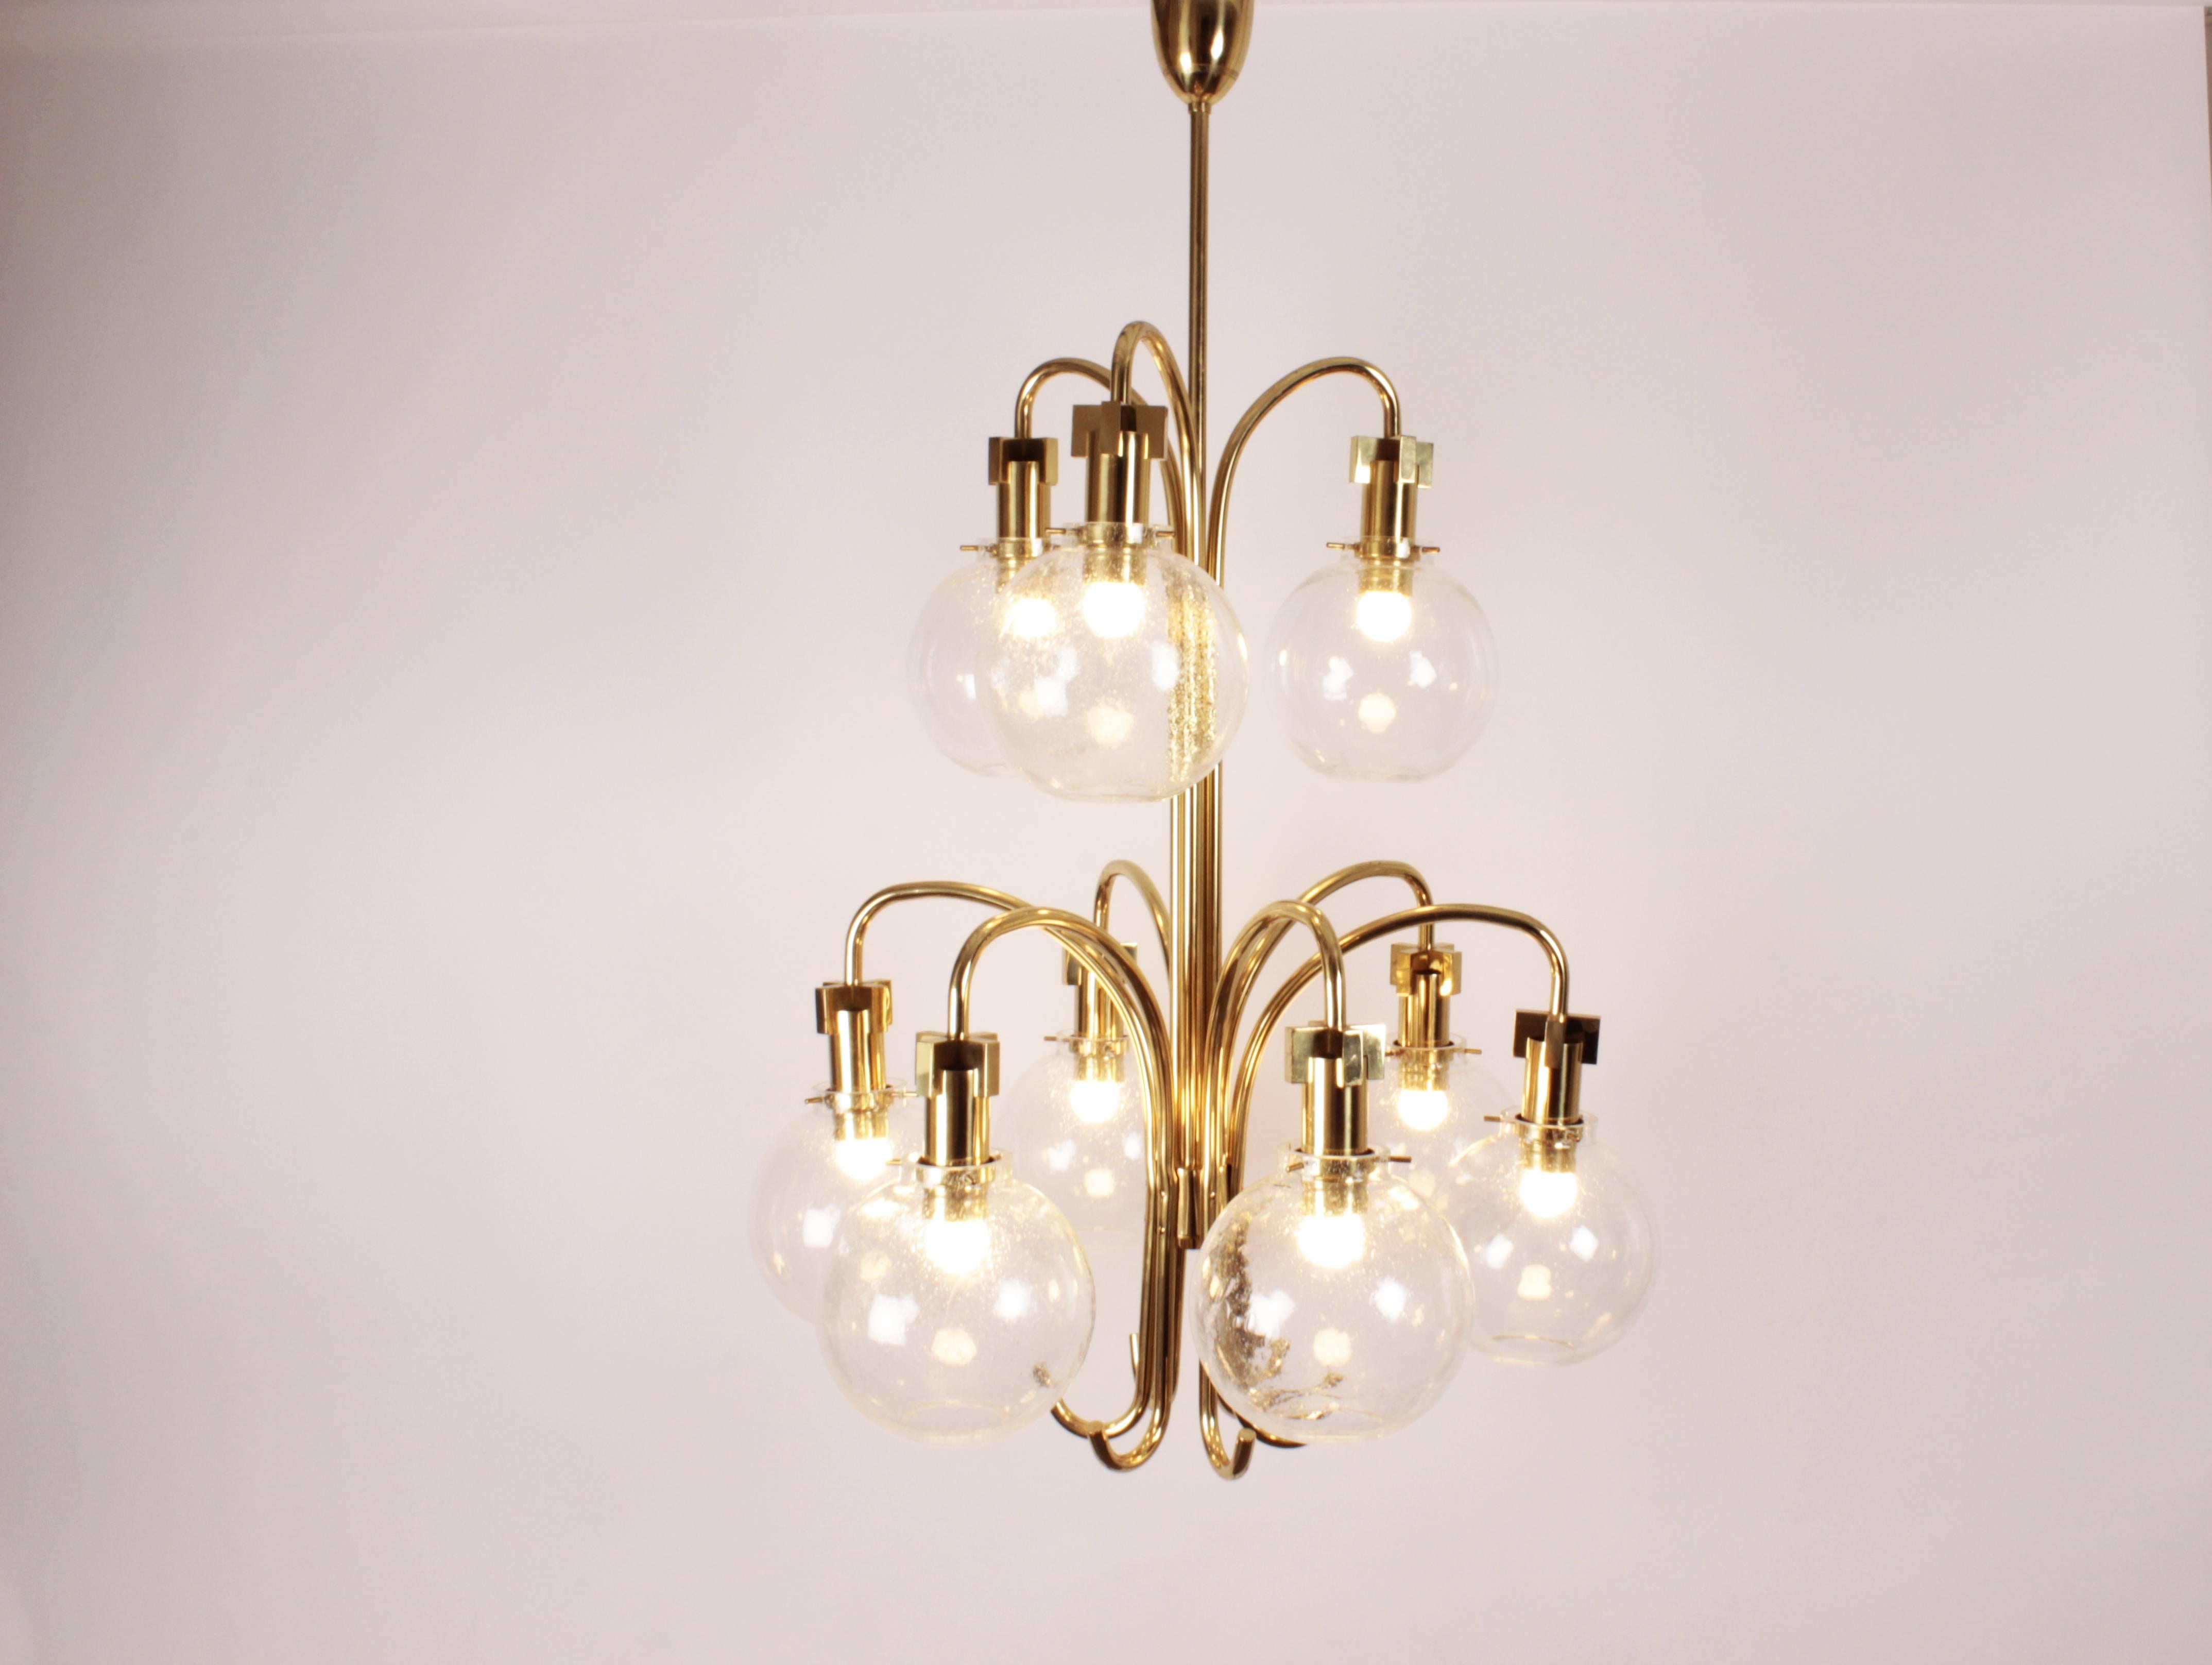 Mid-Century Modern Large Ceiling Light by Hans-Agne Jakobsson, Glass and Brass, Sweden, circa 1960